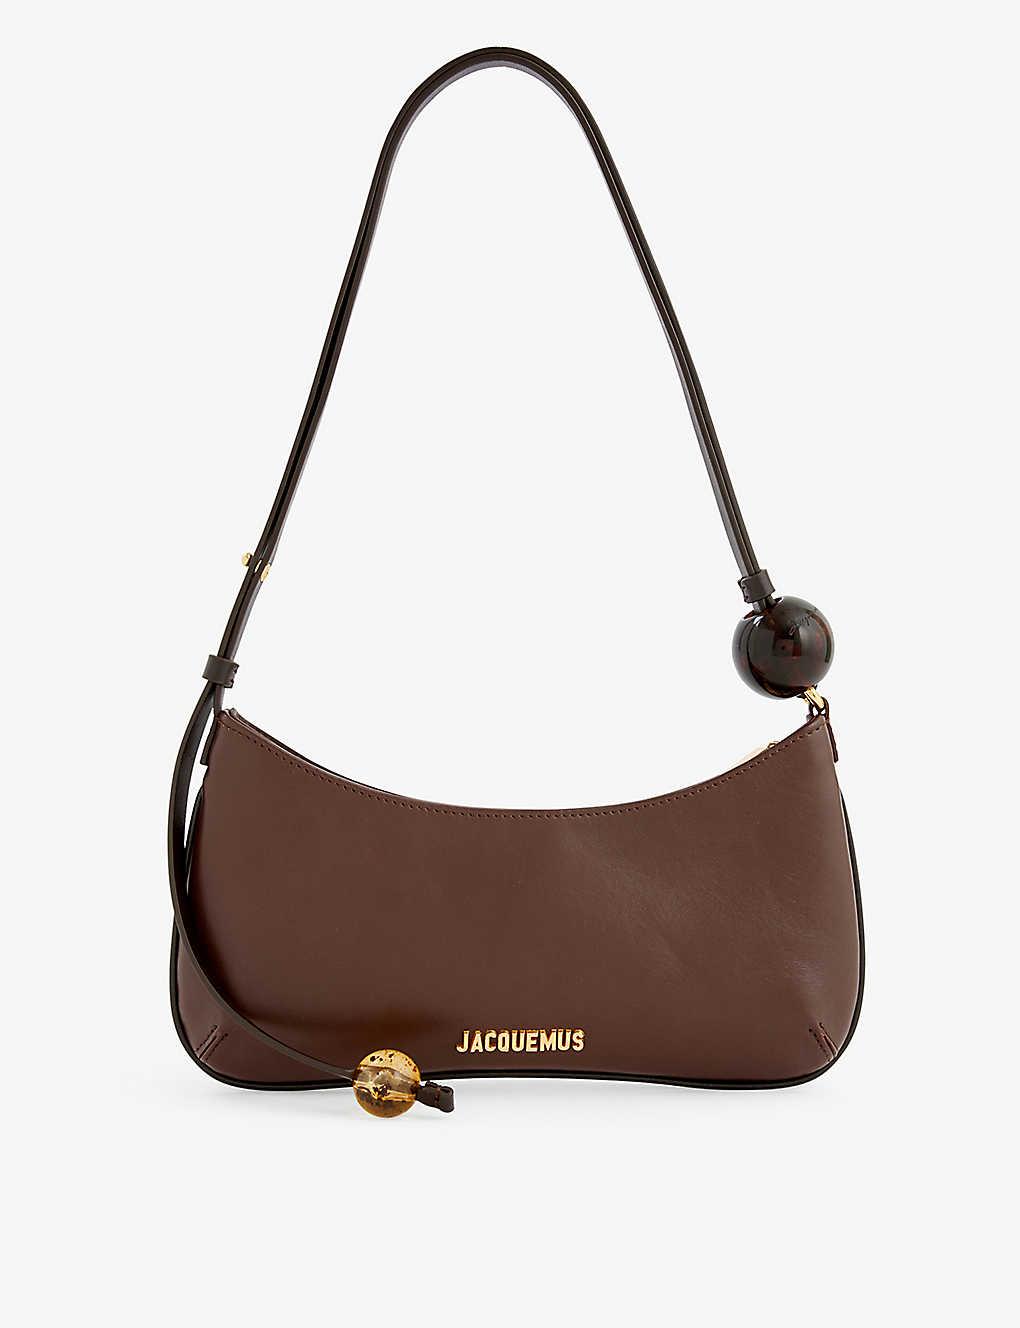 Jacquemus Le Bisou Perle Leather Shoulder Bag in Brown | Lyst